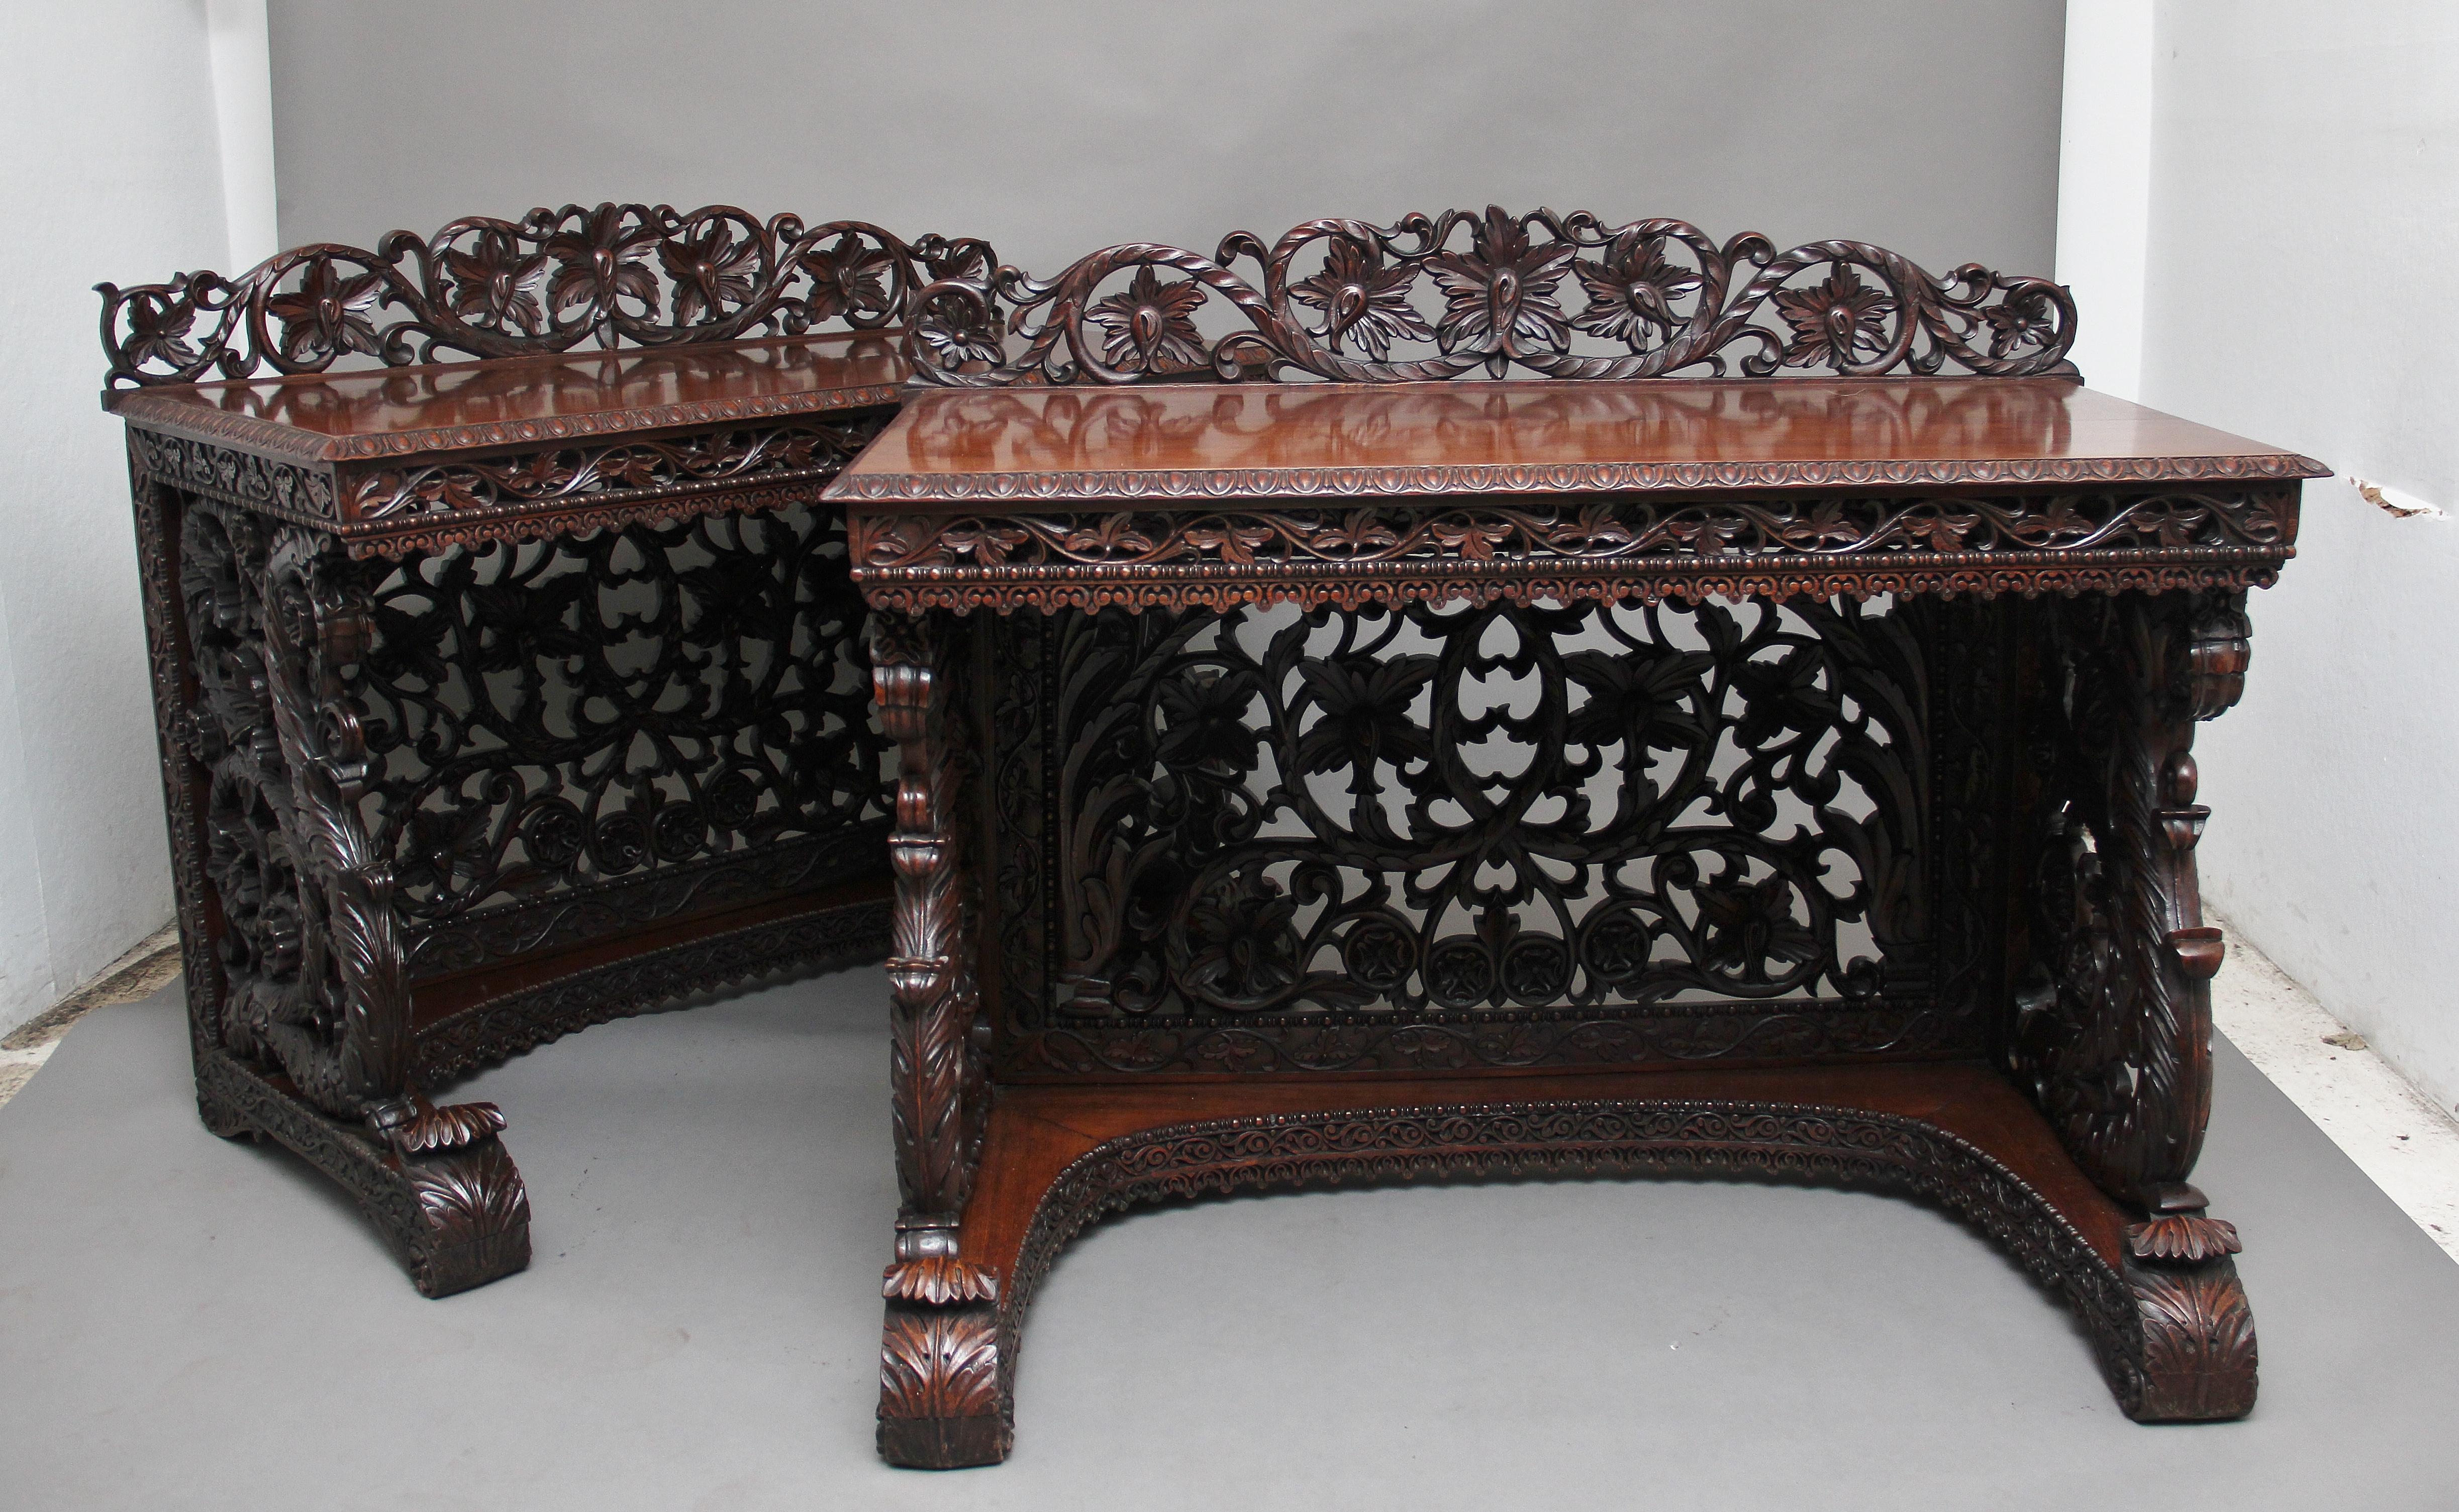 A superb pair of 19th century Indian carved console tables, each having a foliate scroll-carved pierced back over a rectangular top with ovolu-moulded edge upon pierced foliate scroll frieze, scroll apron and well carved conforming sides and back,